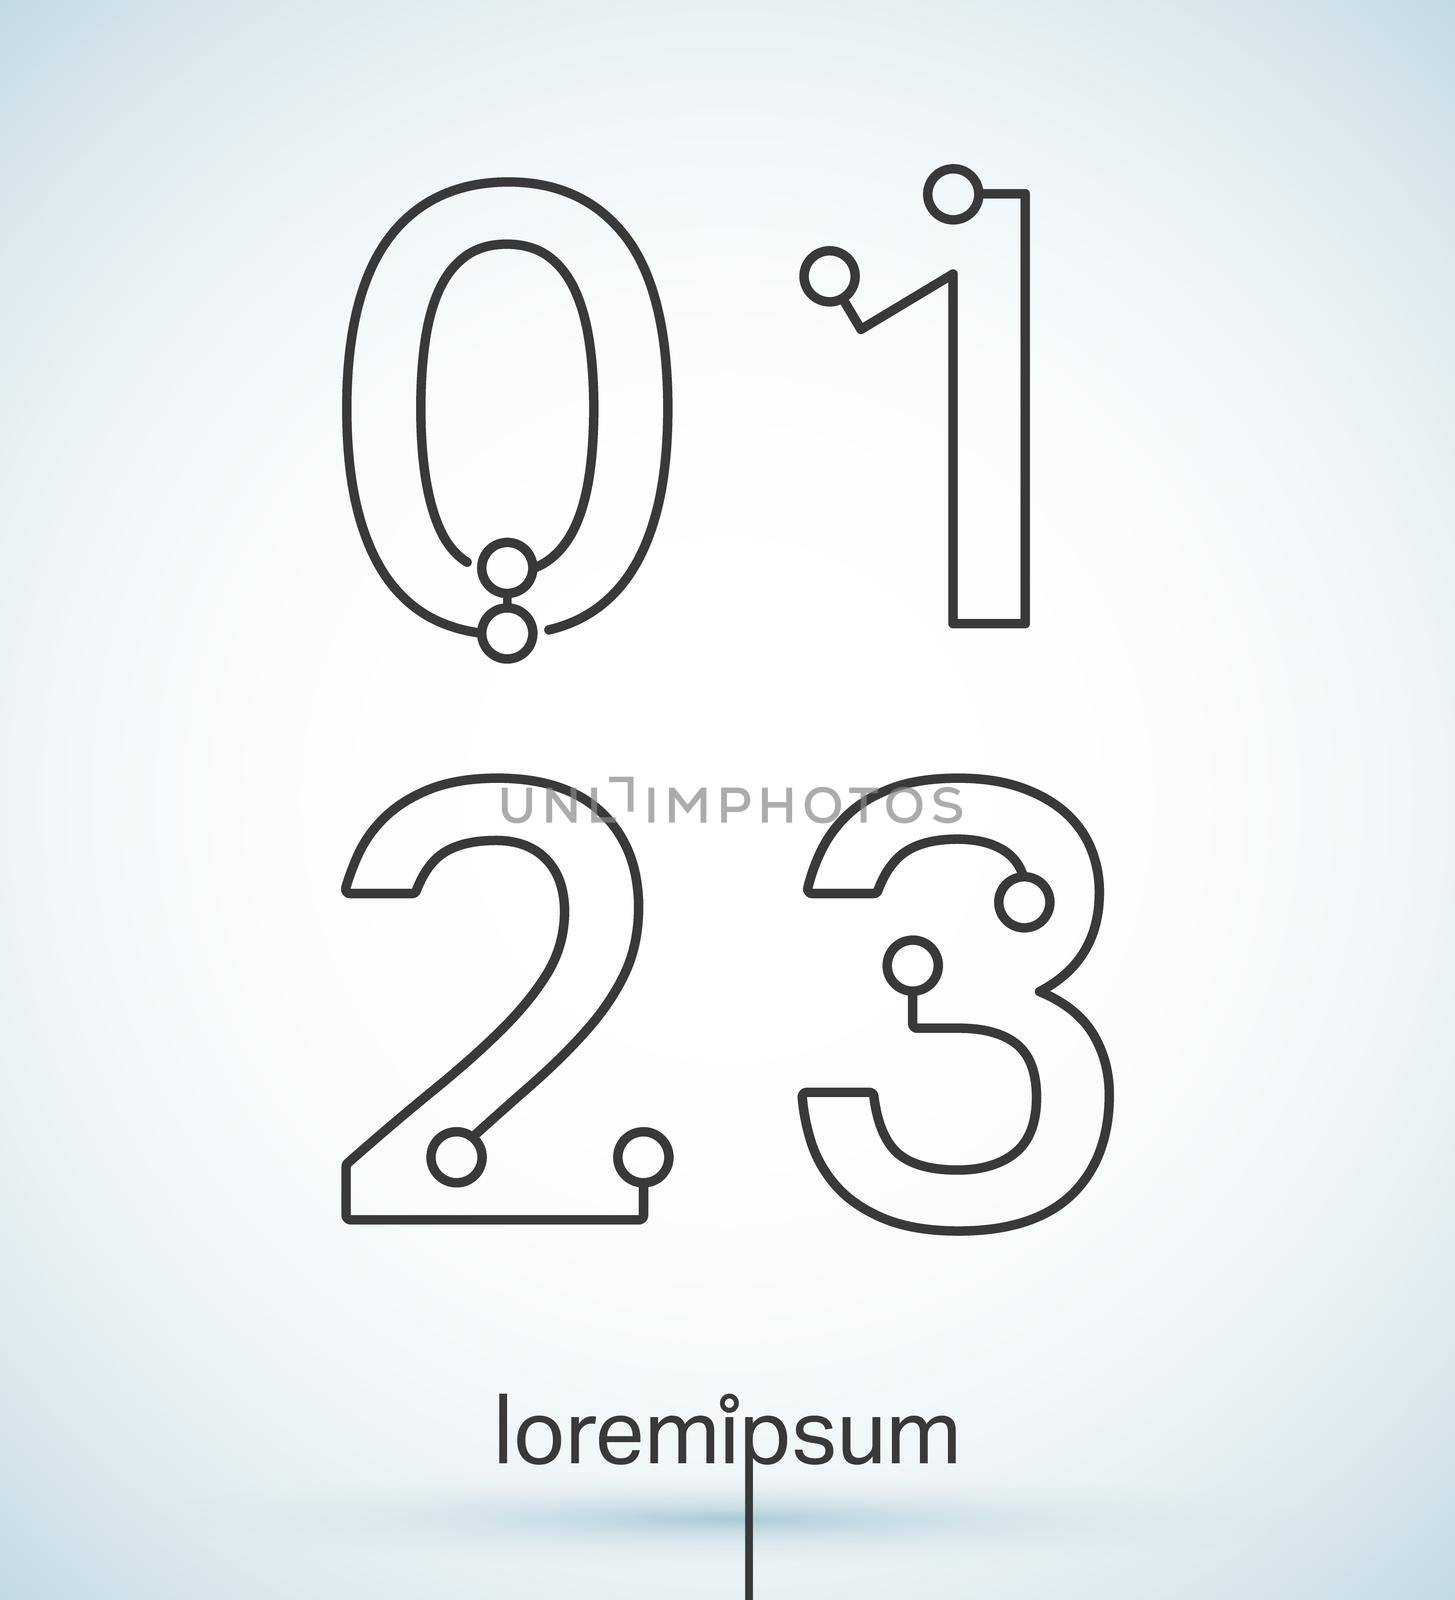 Connection dots font. Set of numbers 0, 1, 2, 3 logo or icon vector design